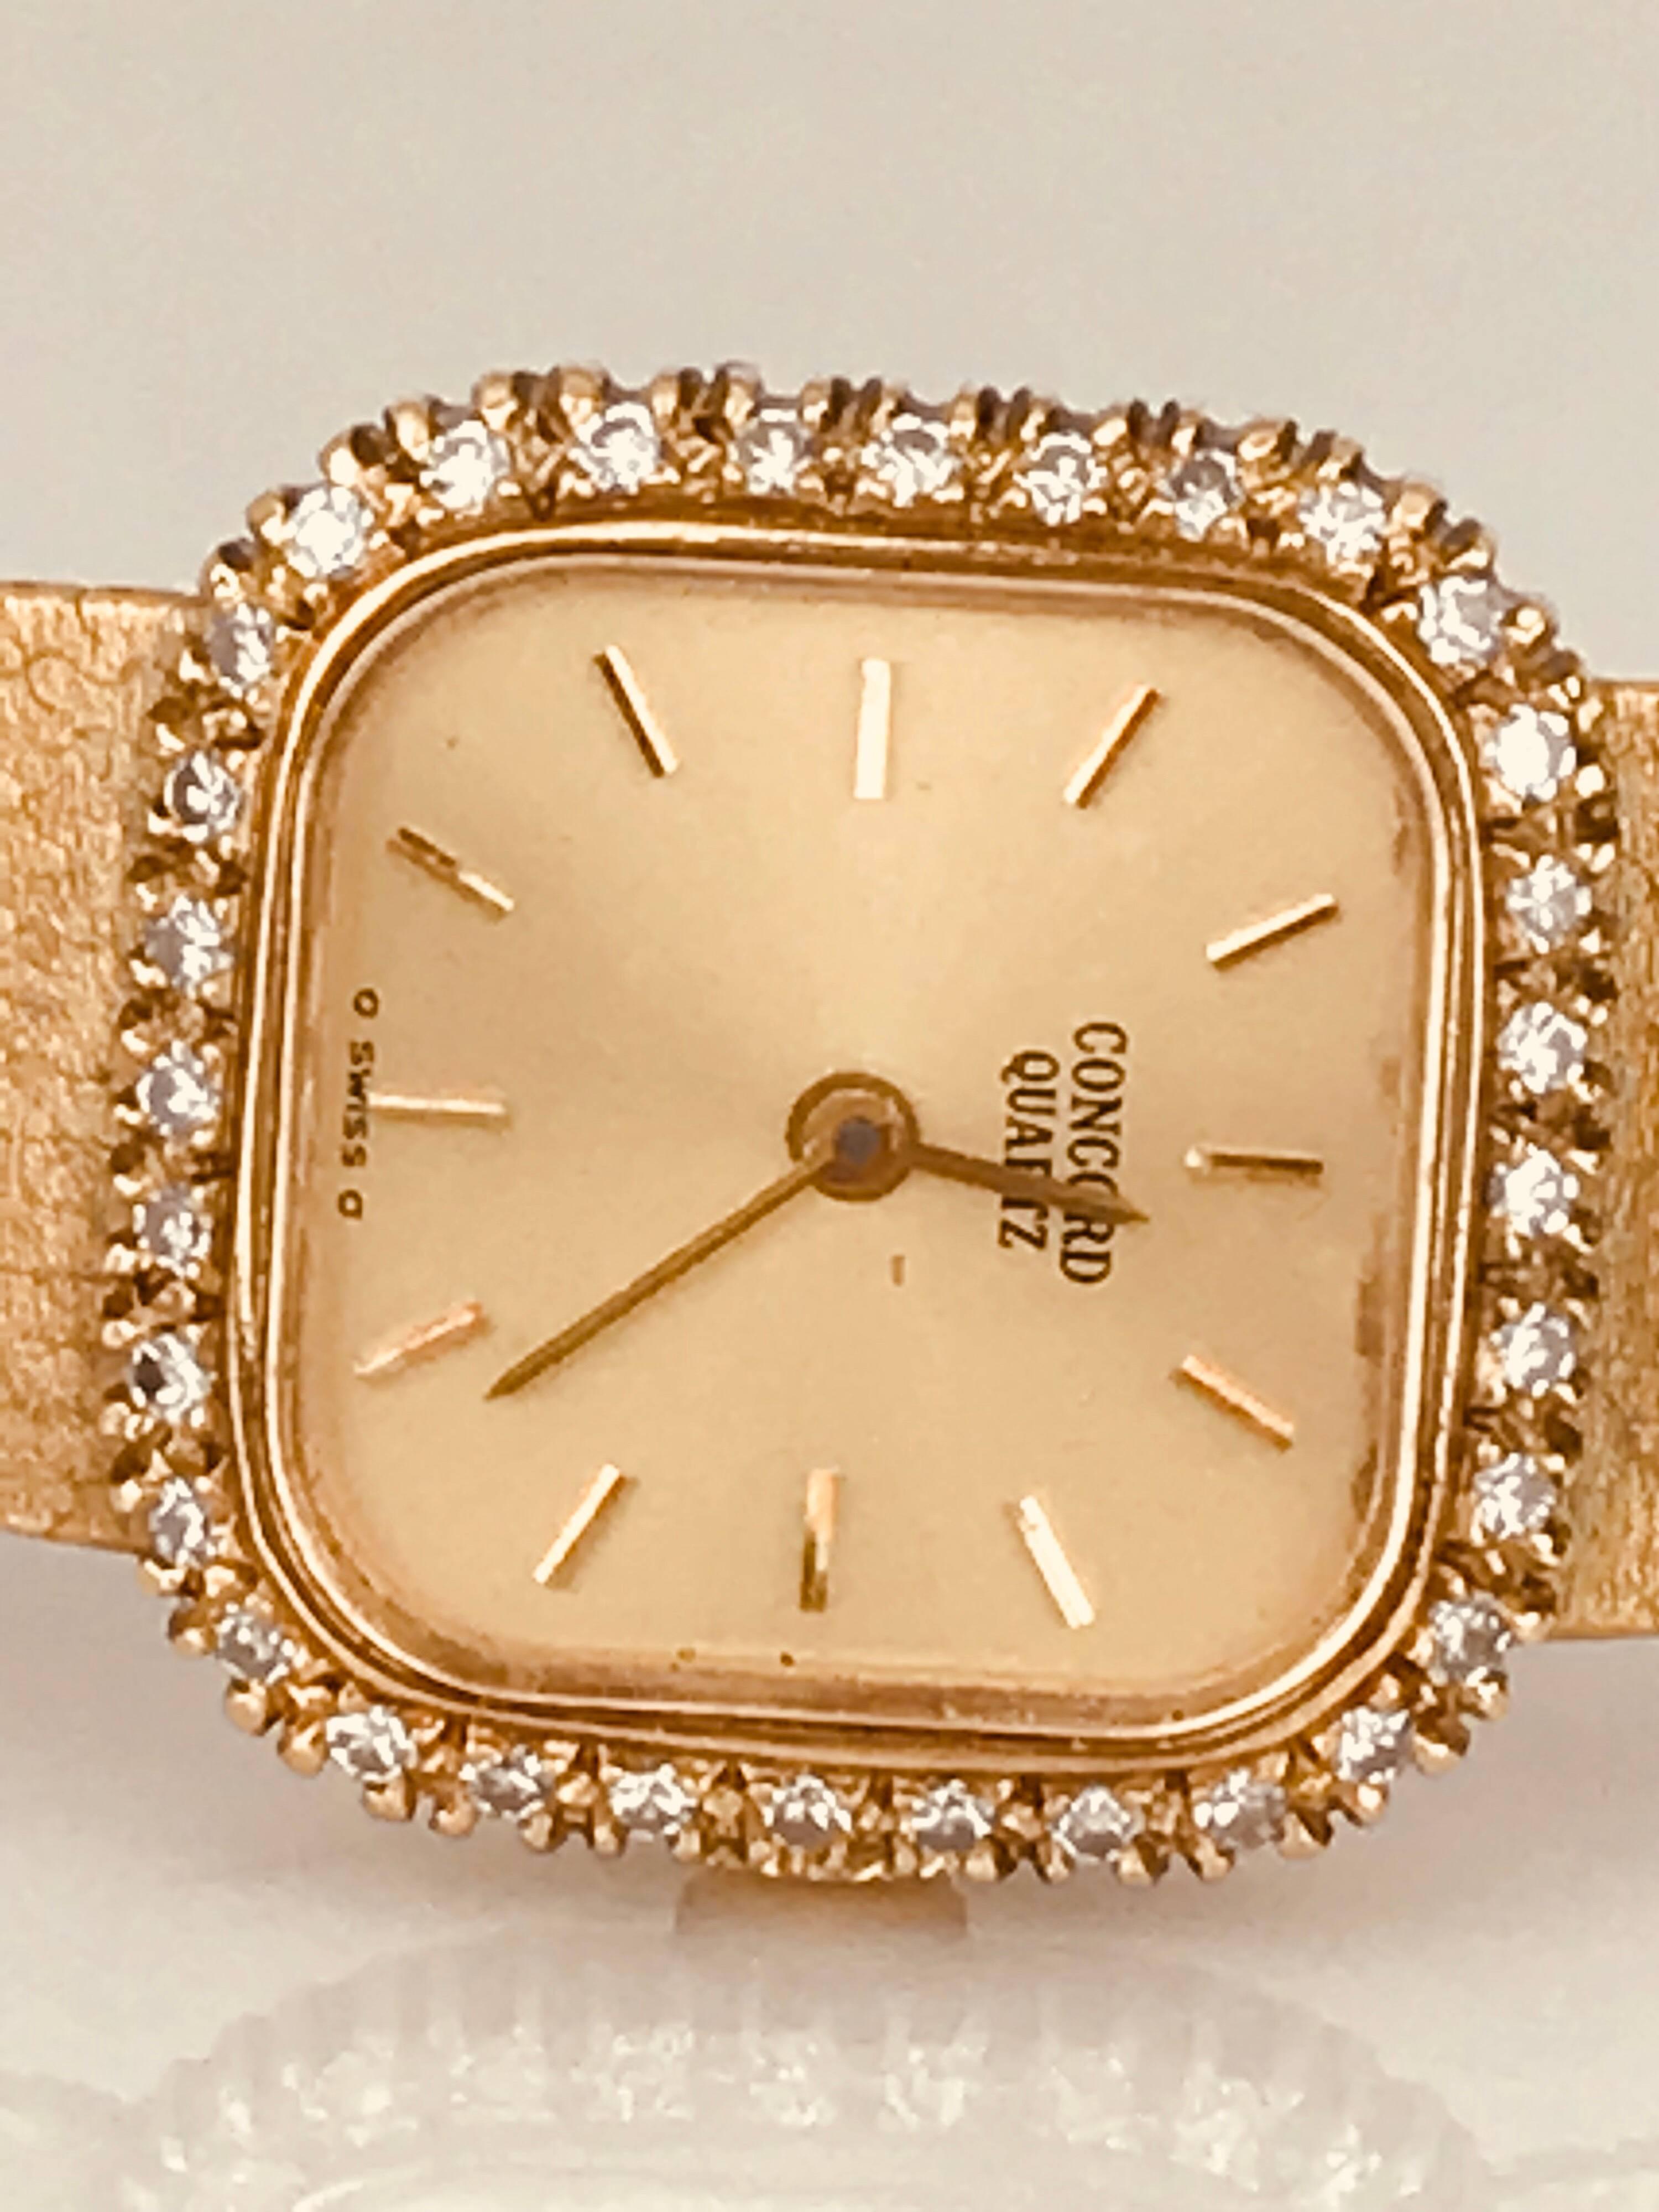 Ladies Diamond mesh Concord watch.  The movement is quartz.
The metal is 14 karat. Retro style, Circa 1985

The diamond bezel consists of  (23) round single cut stones weighing approximately 1.6 millimeters in diameter.  Total weight of the diamonds